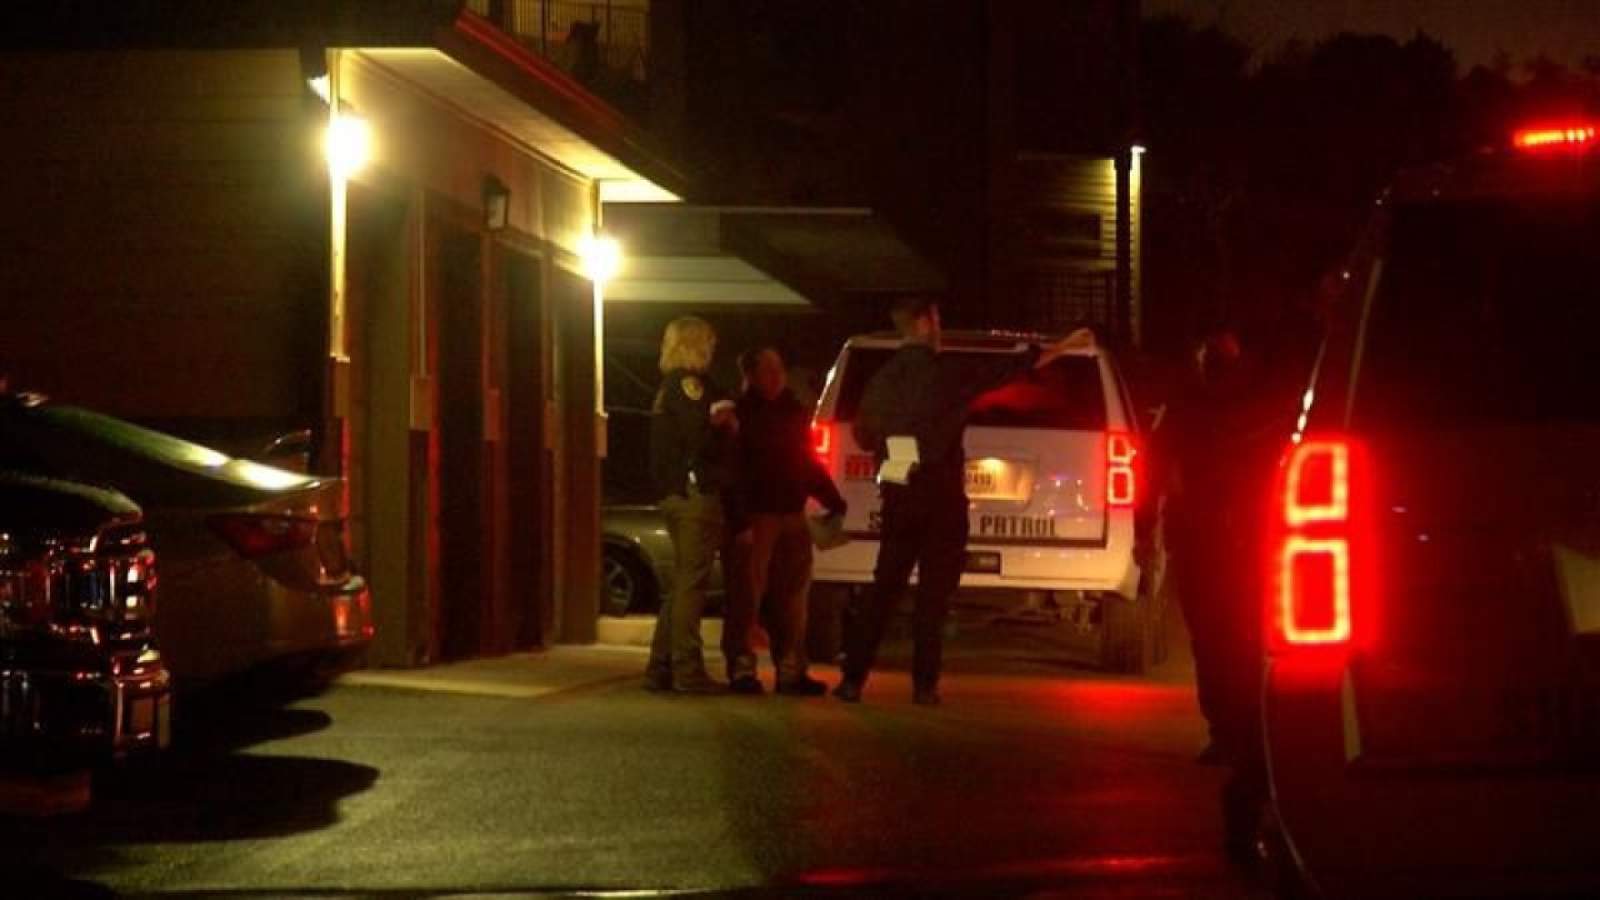 Detectives searching for clues after man shot dead in apartment near Fair Oaks Ranch